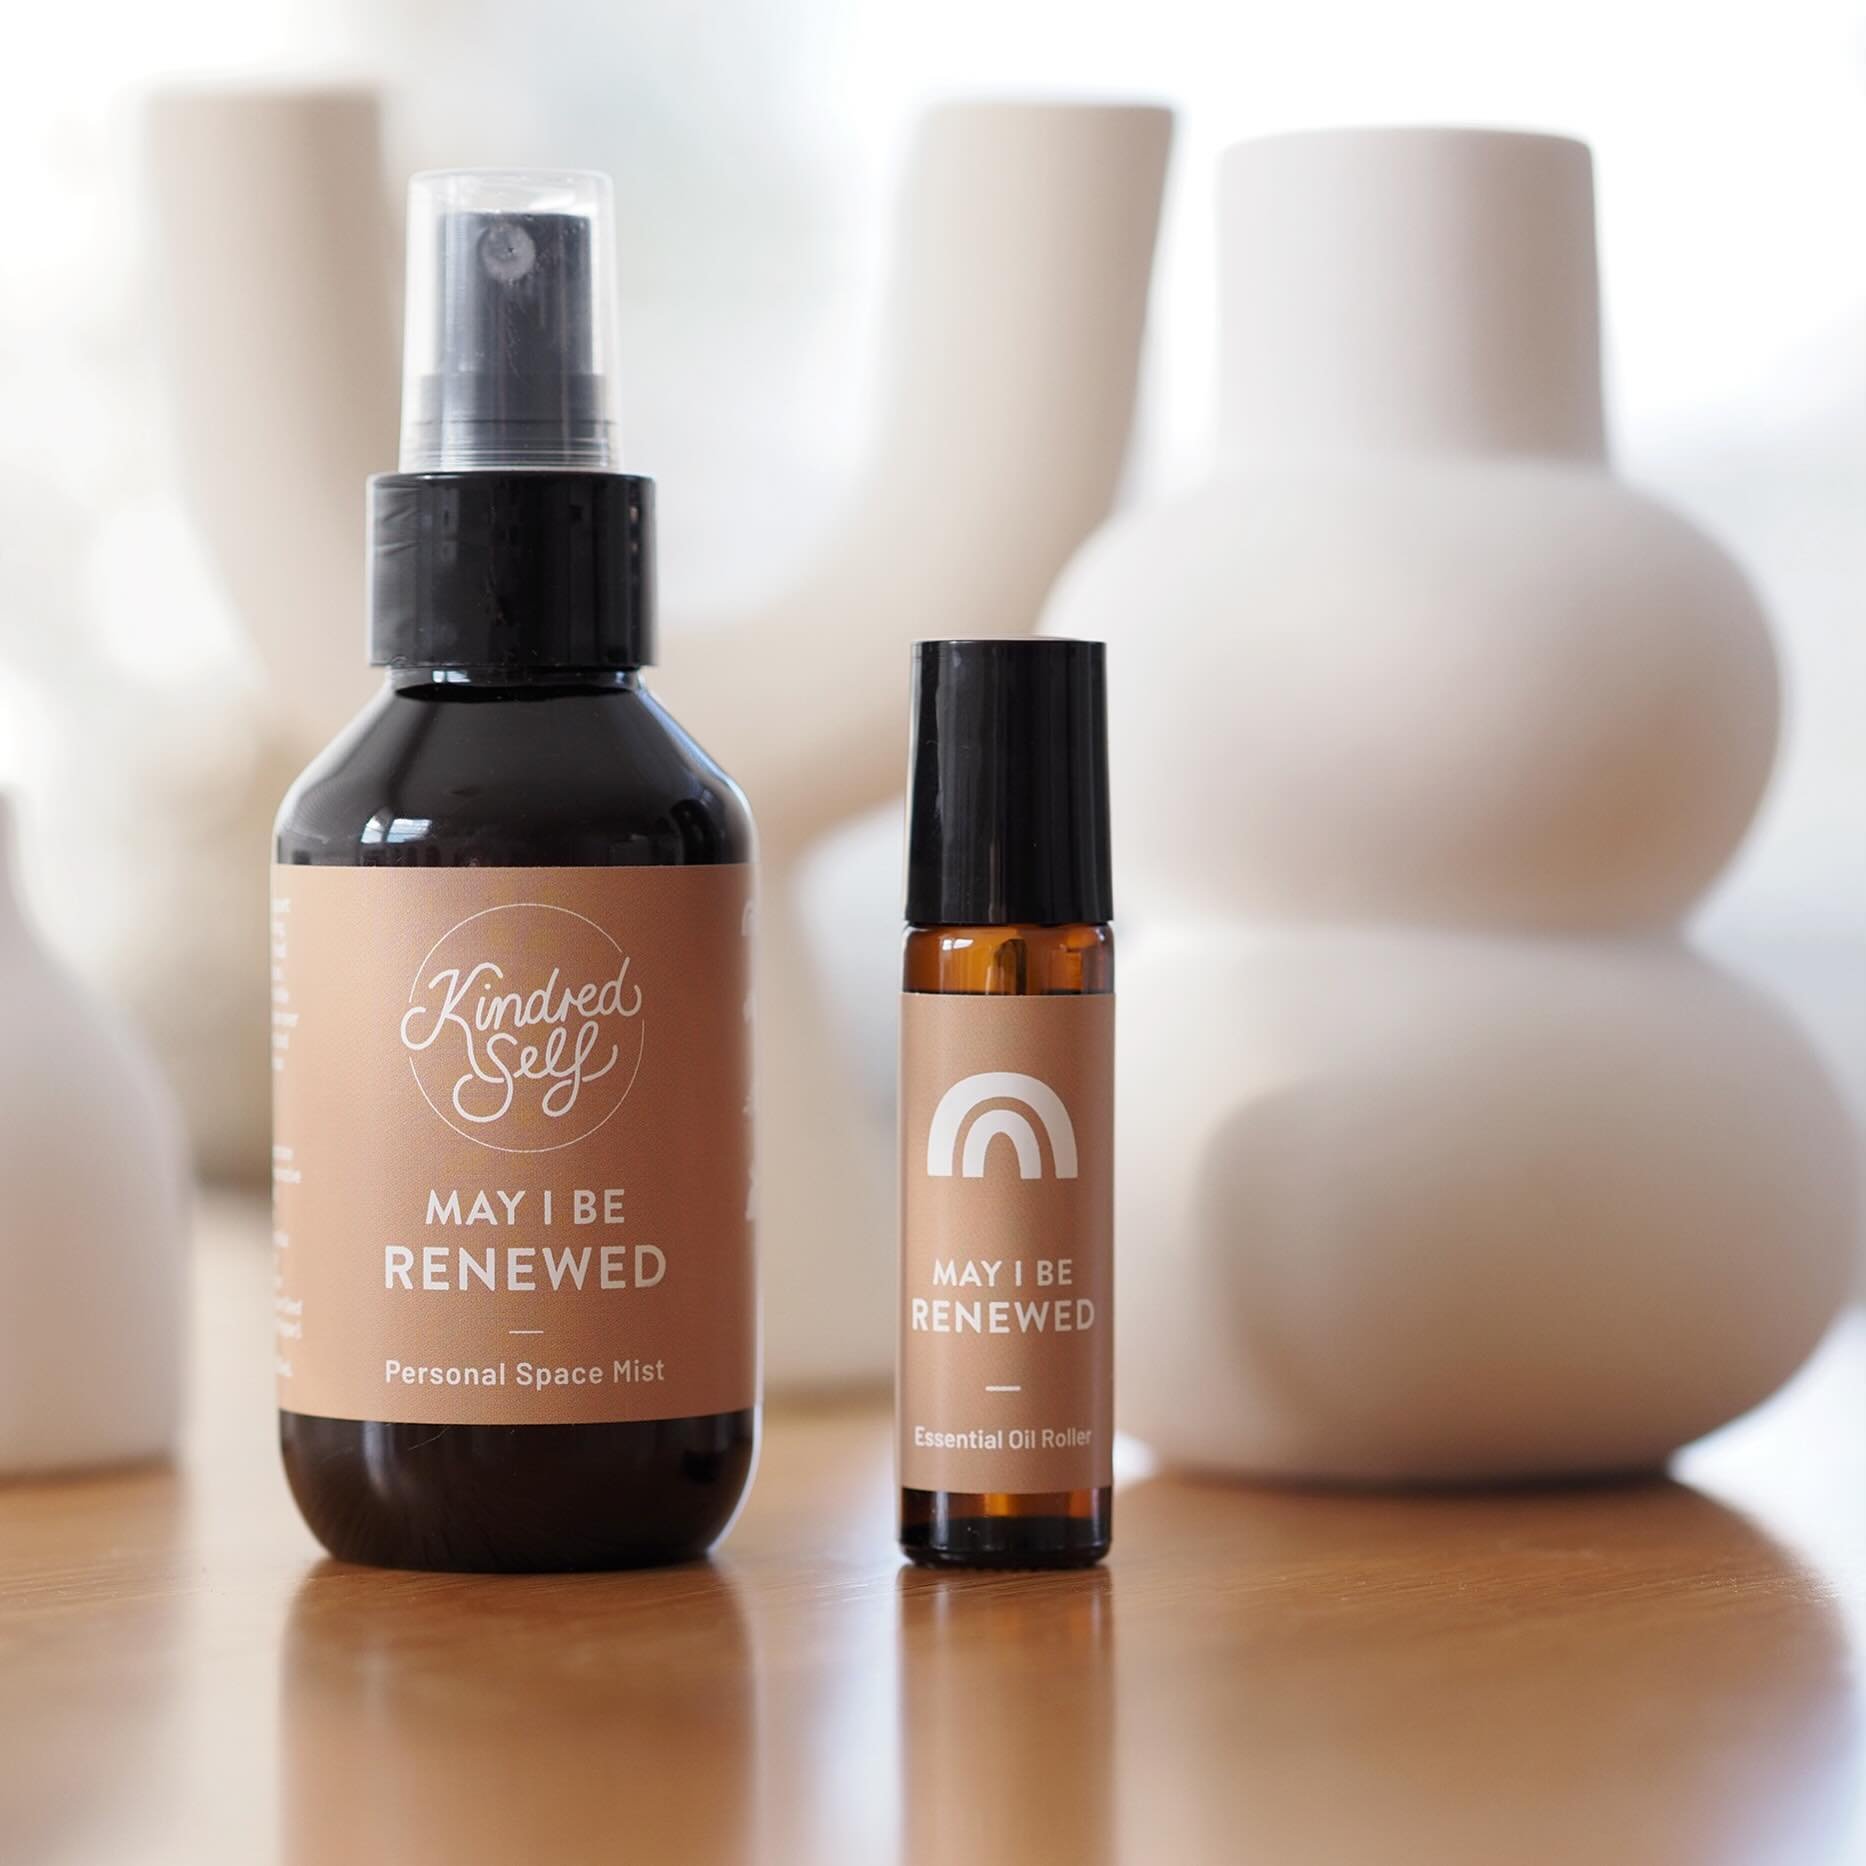 &lsquo;May I Be Renewed&rsquo; is my &lsquo;go to&rsquo; essential oil blend when I sense a bug lurking - I roll it on my throat, the back of my neck and wrists to help support my immune and fight off any sickness.

And if I feel I need an extra immu